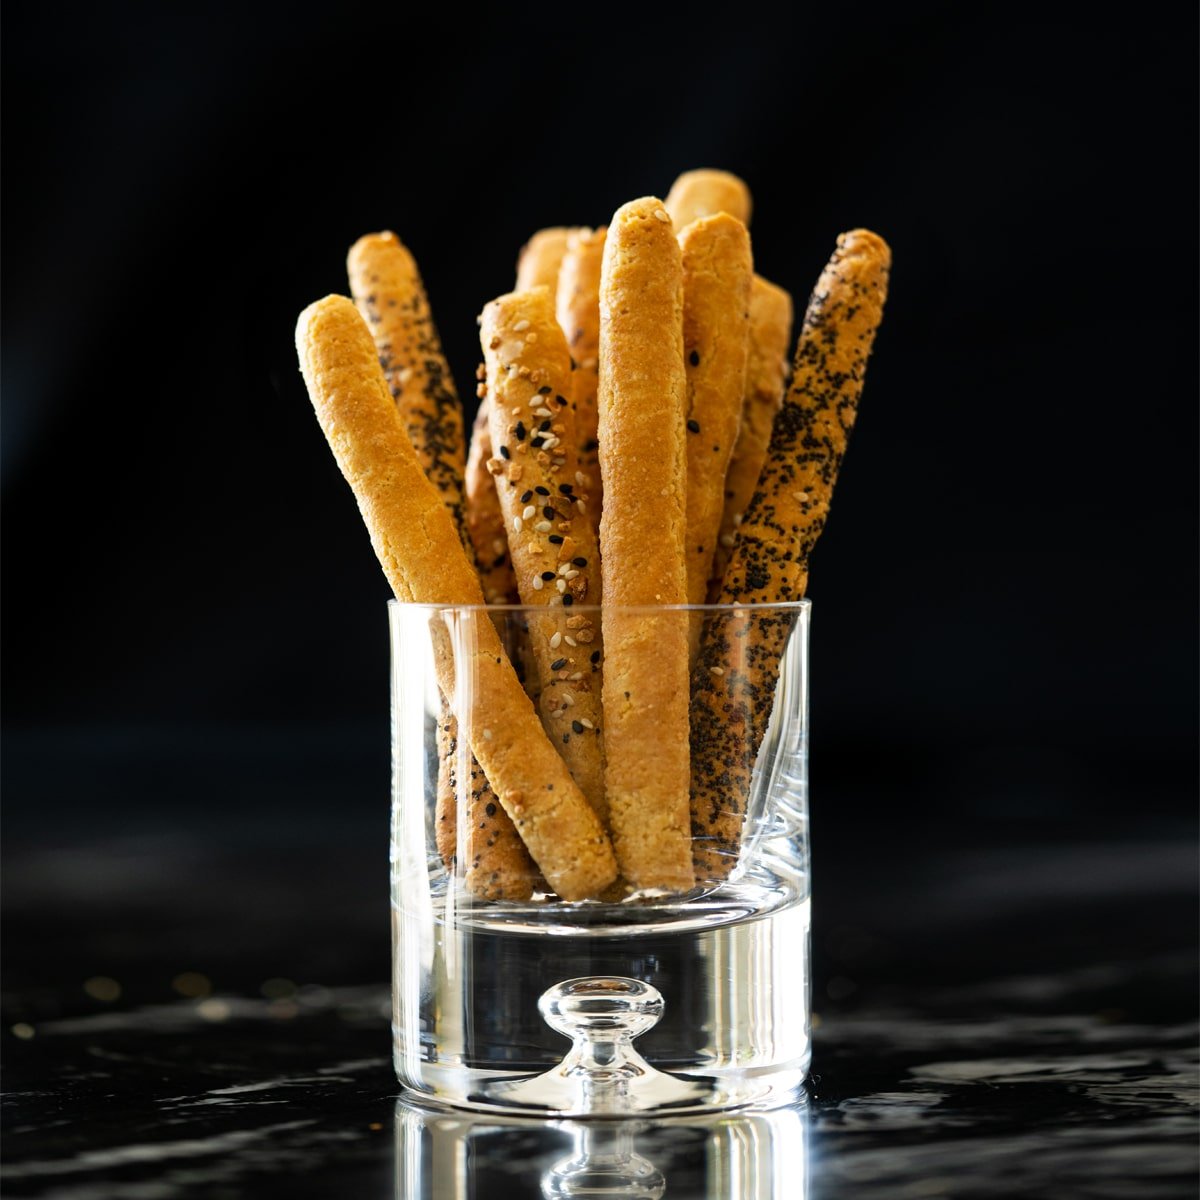 Keto breadsticks in a glass with a black background